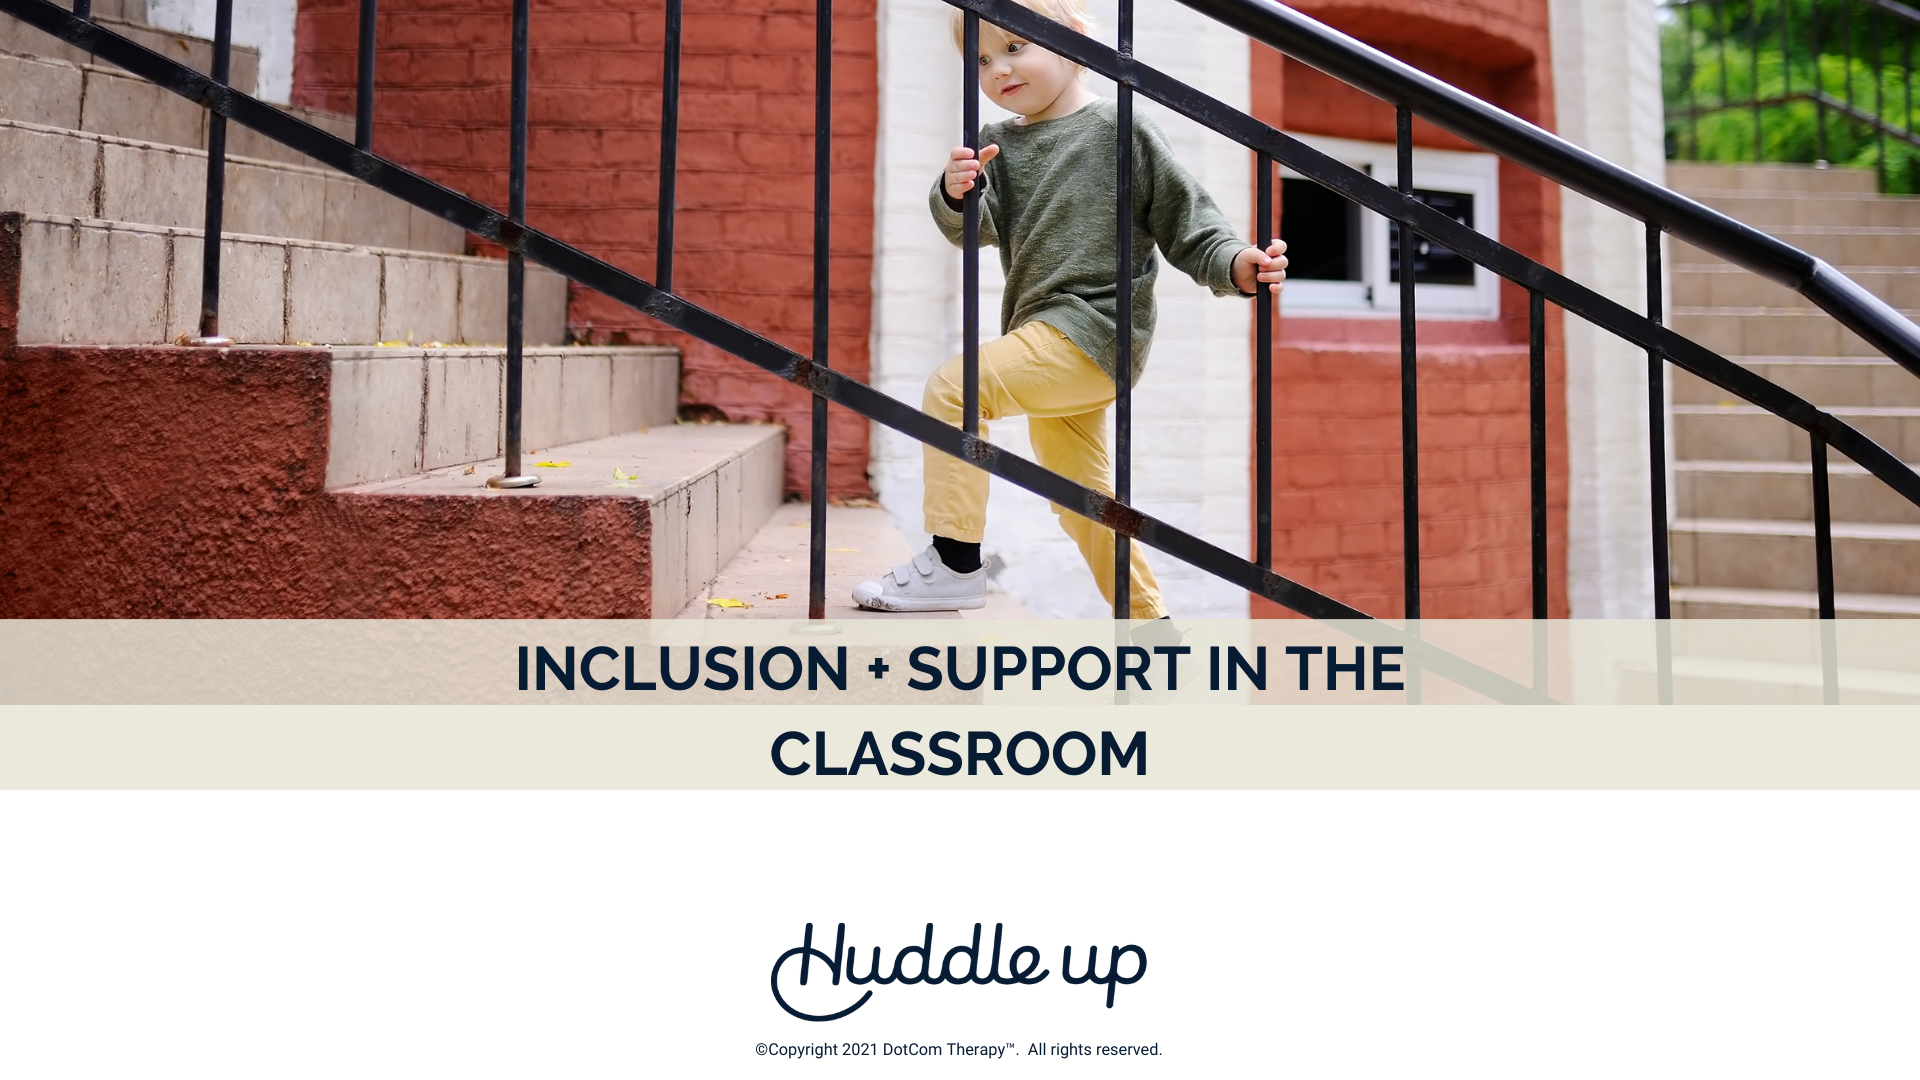 Inclusion & Support in the Classroom